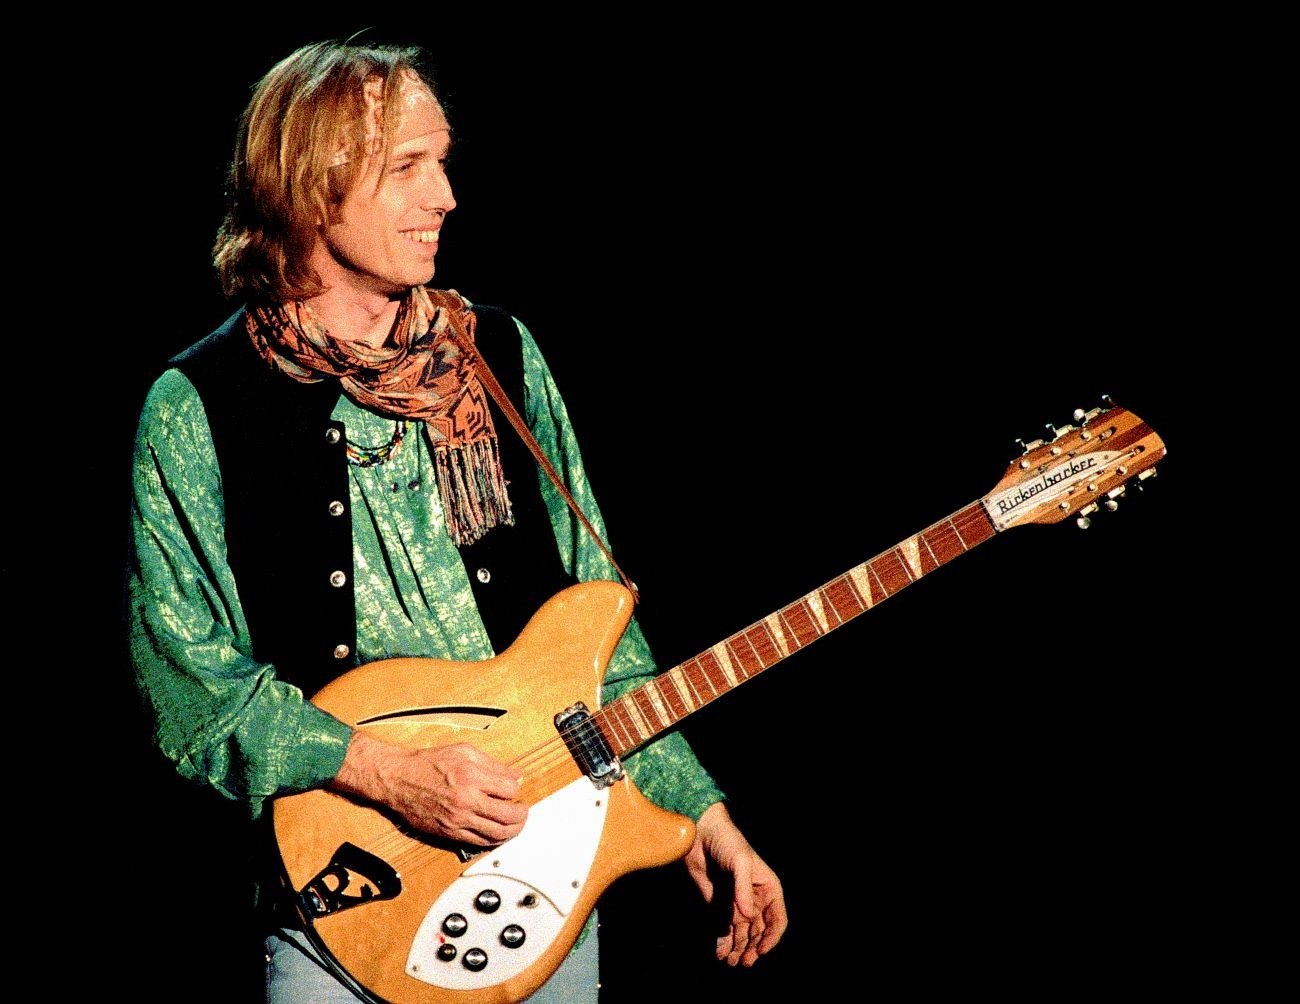 Tom Petty wears a green shirt and vest and holds a guitar. 